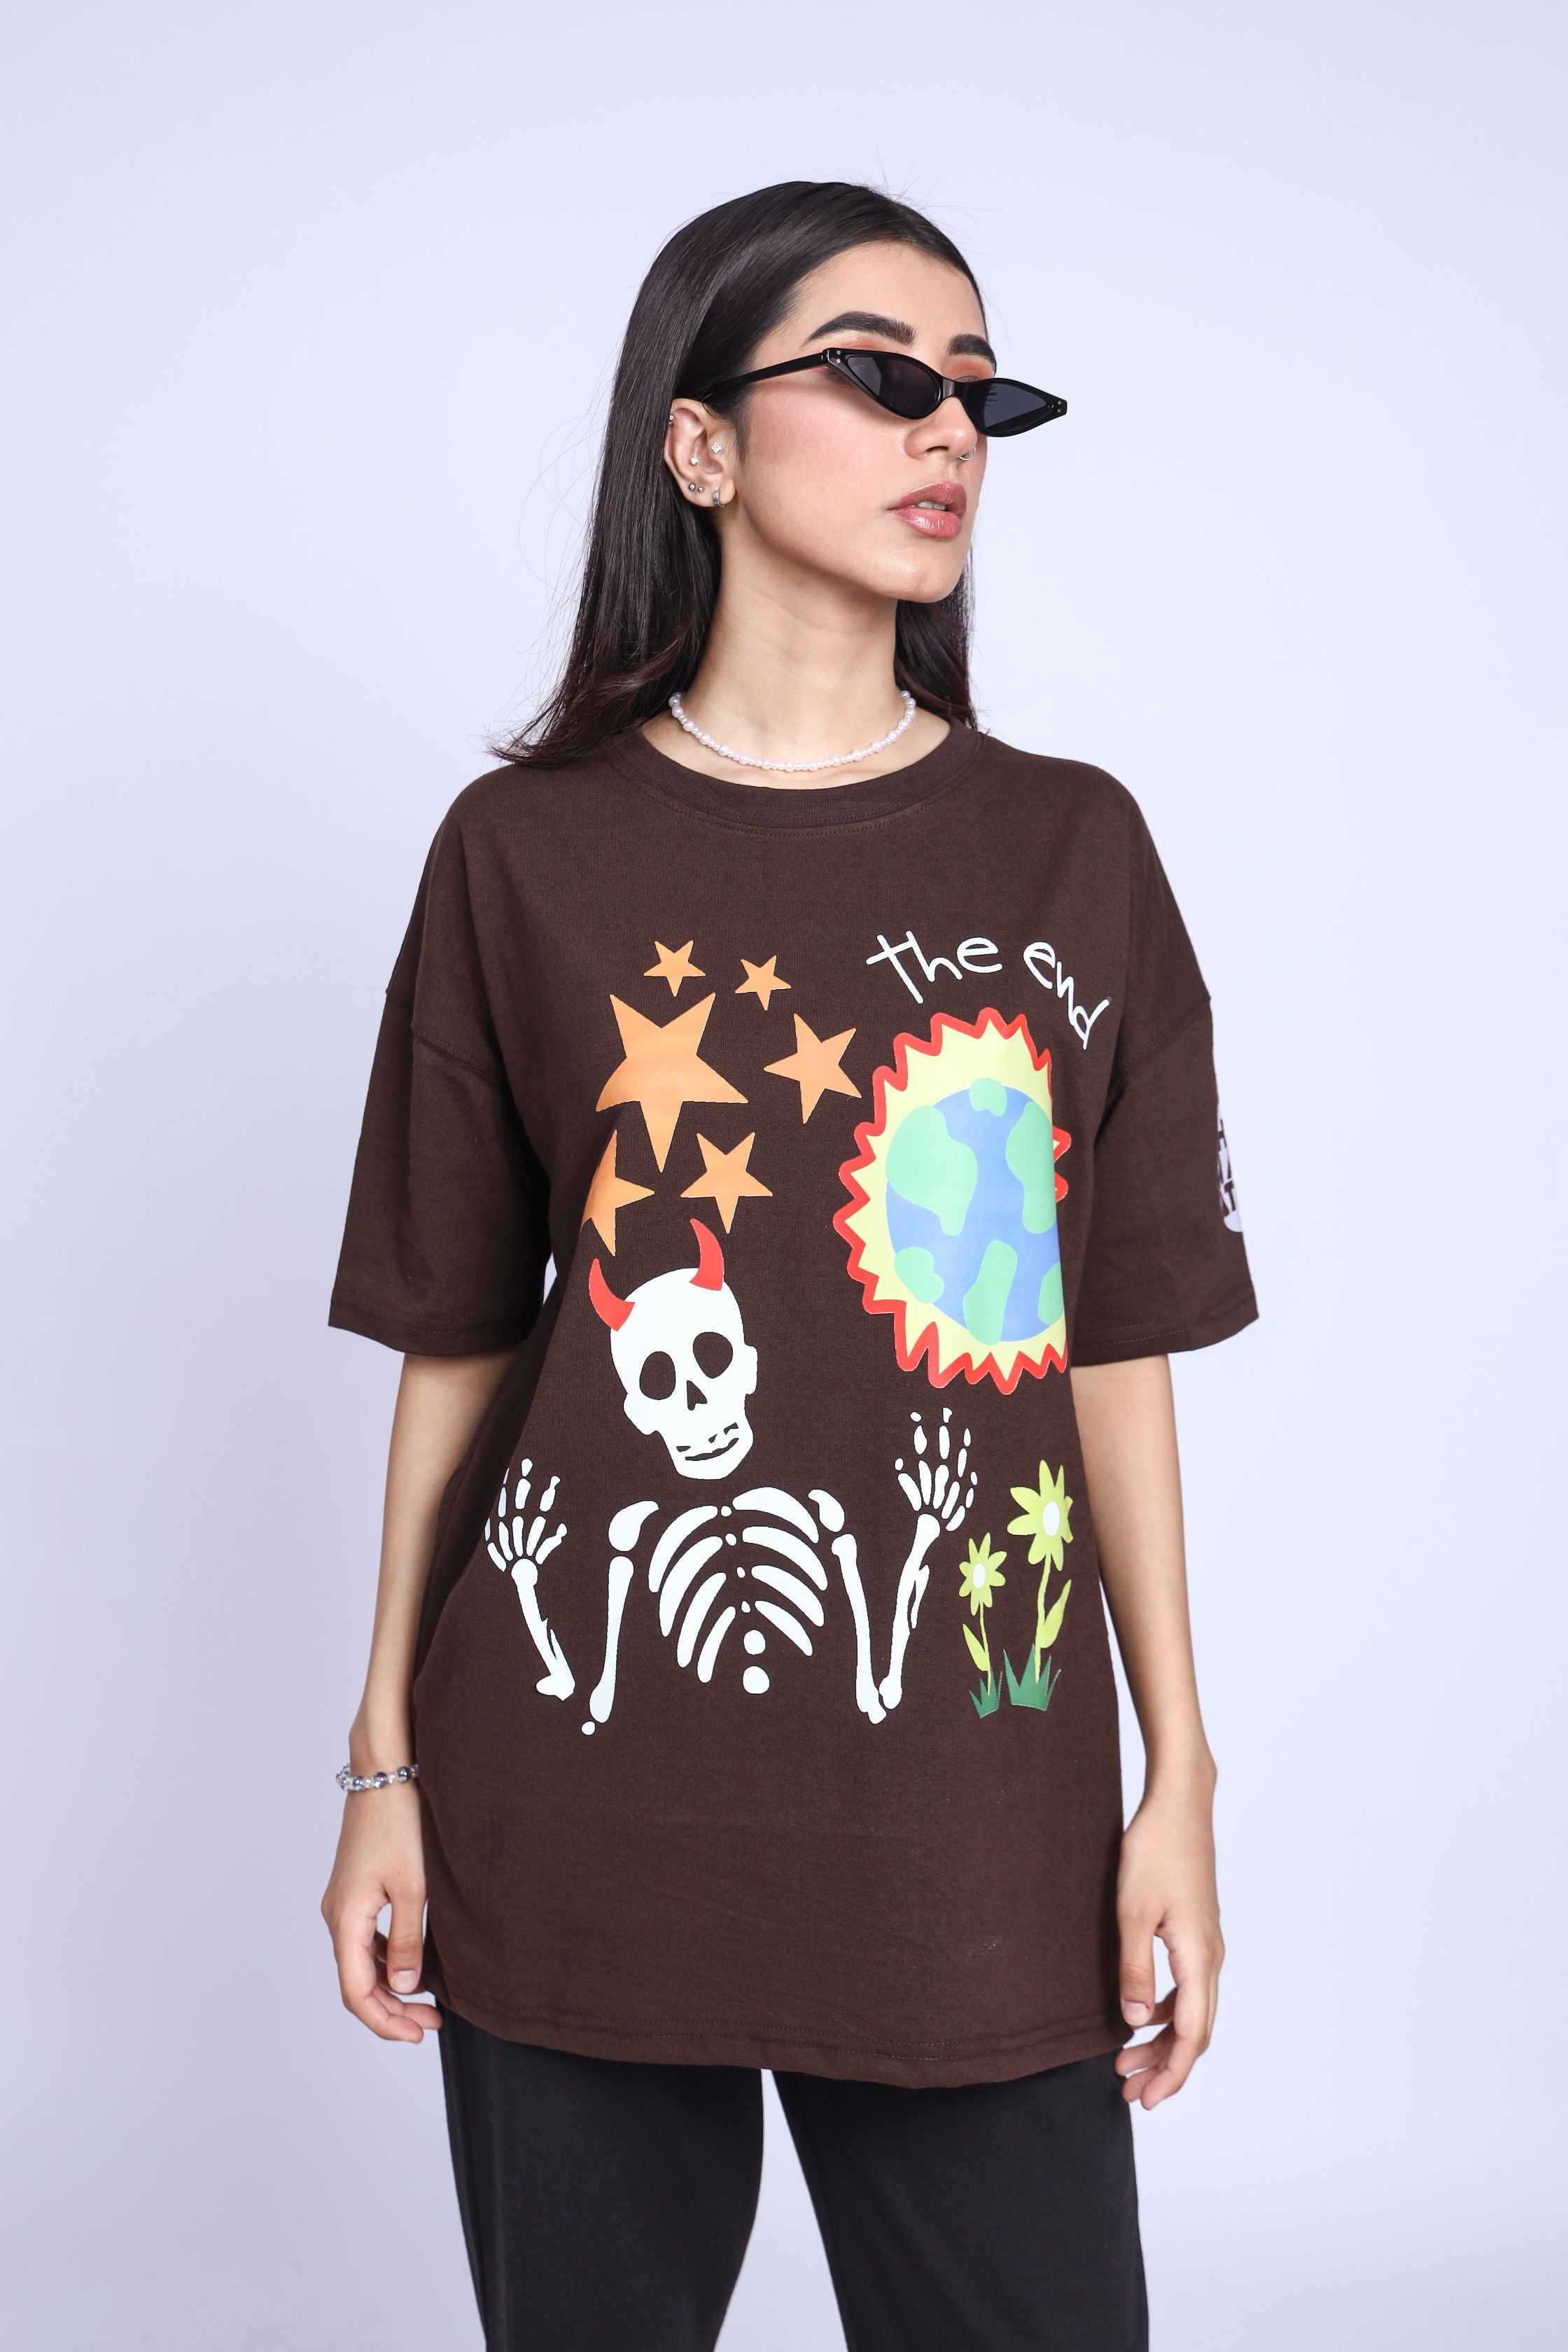 THE END OVERSIZED T-SHIRT